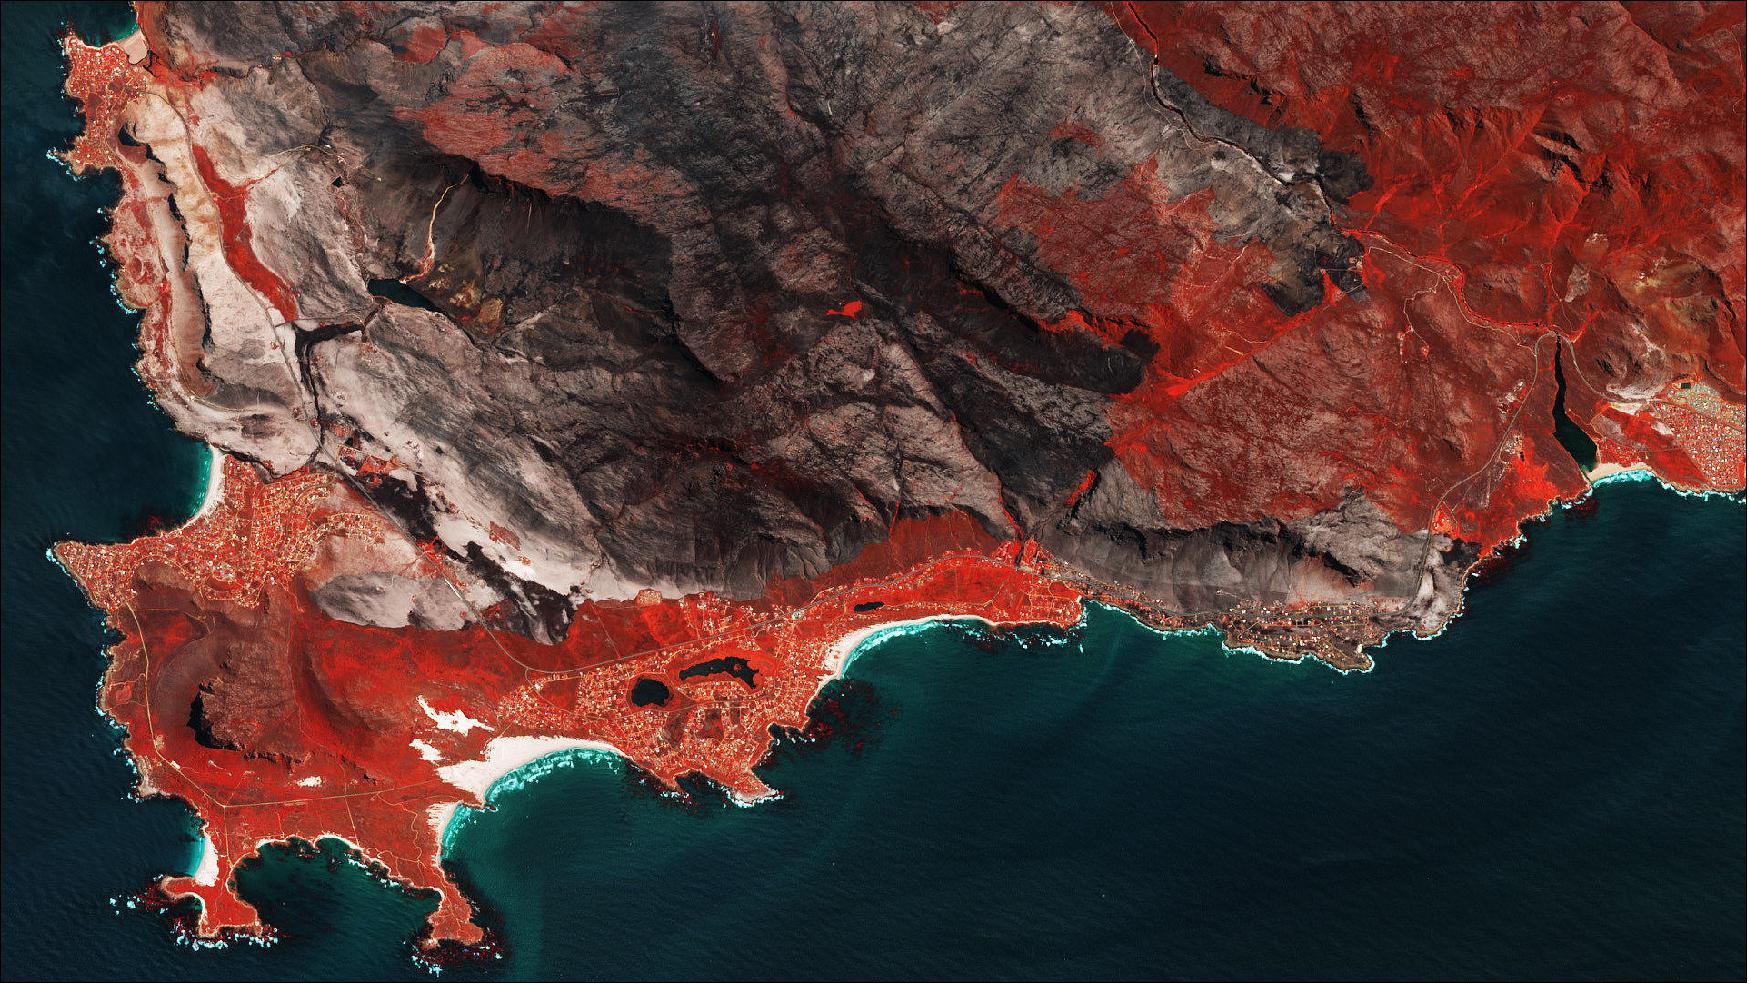 Figure 52: This Copernicus Sentinel-2 image from 26 January 2019 shows fire-scarred land near the Betty’s Bay area of Cape Town in South Africa. This false-color image has been processed to show burned areas in dark greys and browns, and areas covered with vegetation are shown in red [image credit: ESA, the image contains modified Copernicus Sentinel data (2019), processed by ESA, CC BY-SA 3.0 IGO] 51)